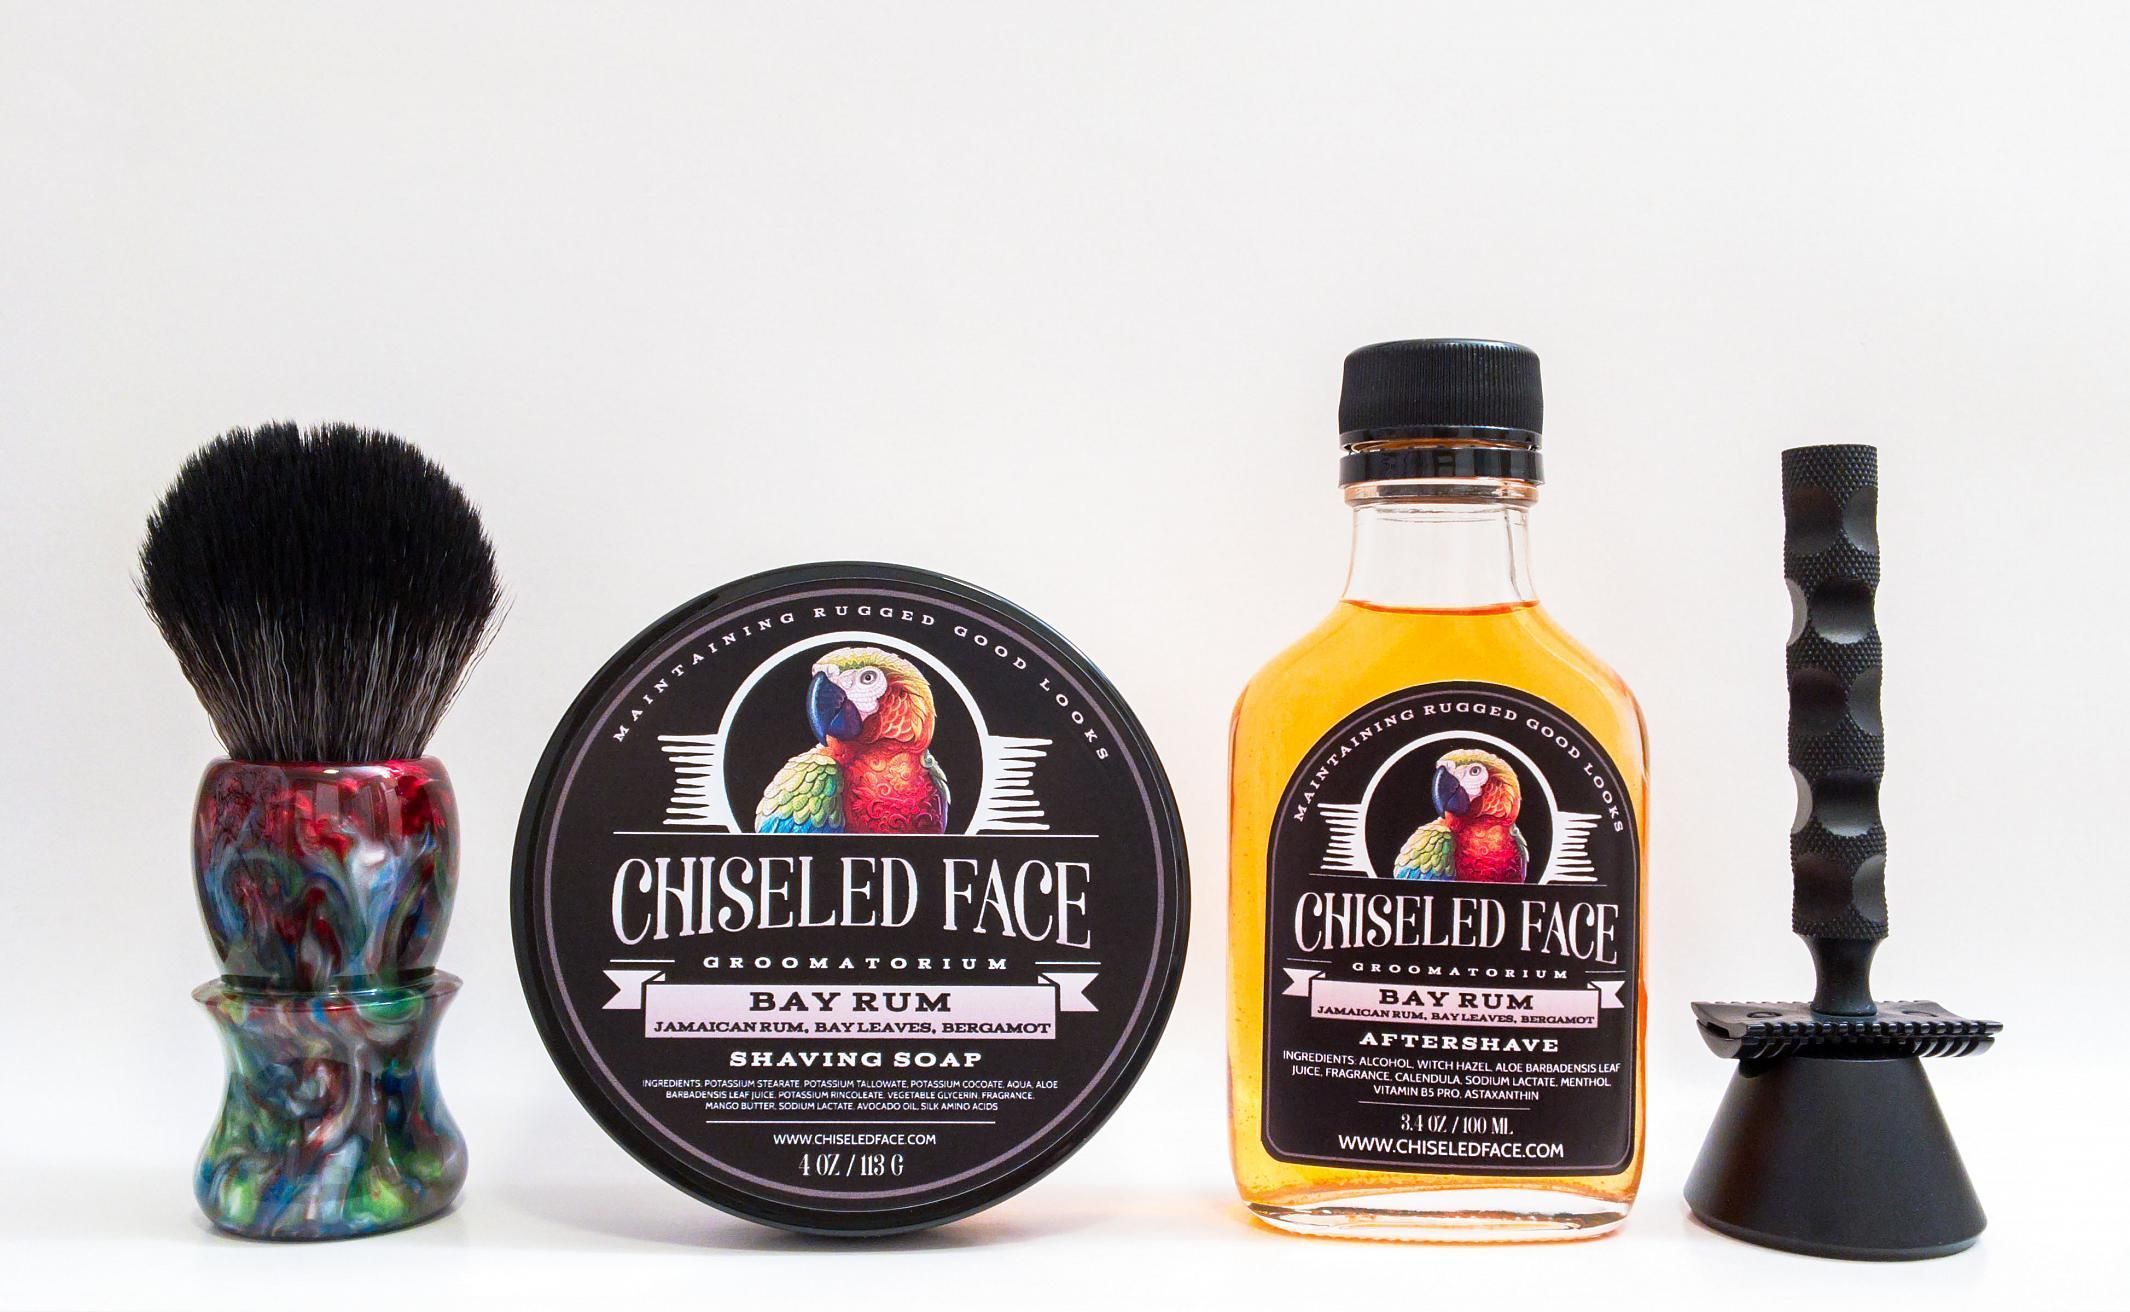 Chiseled Face "Bay Rum"